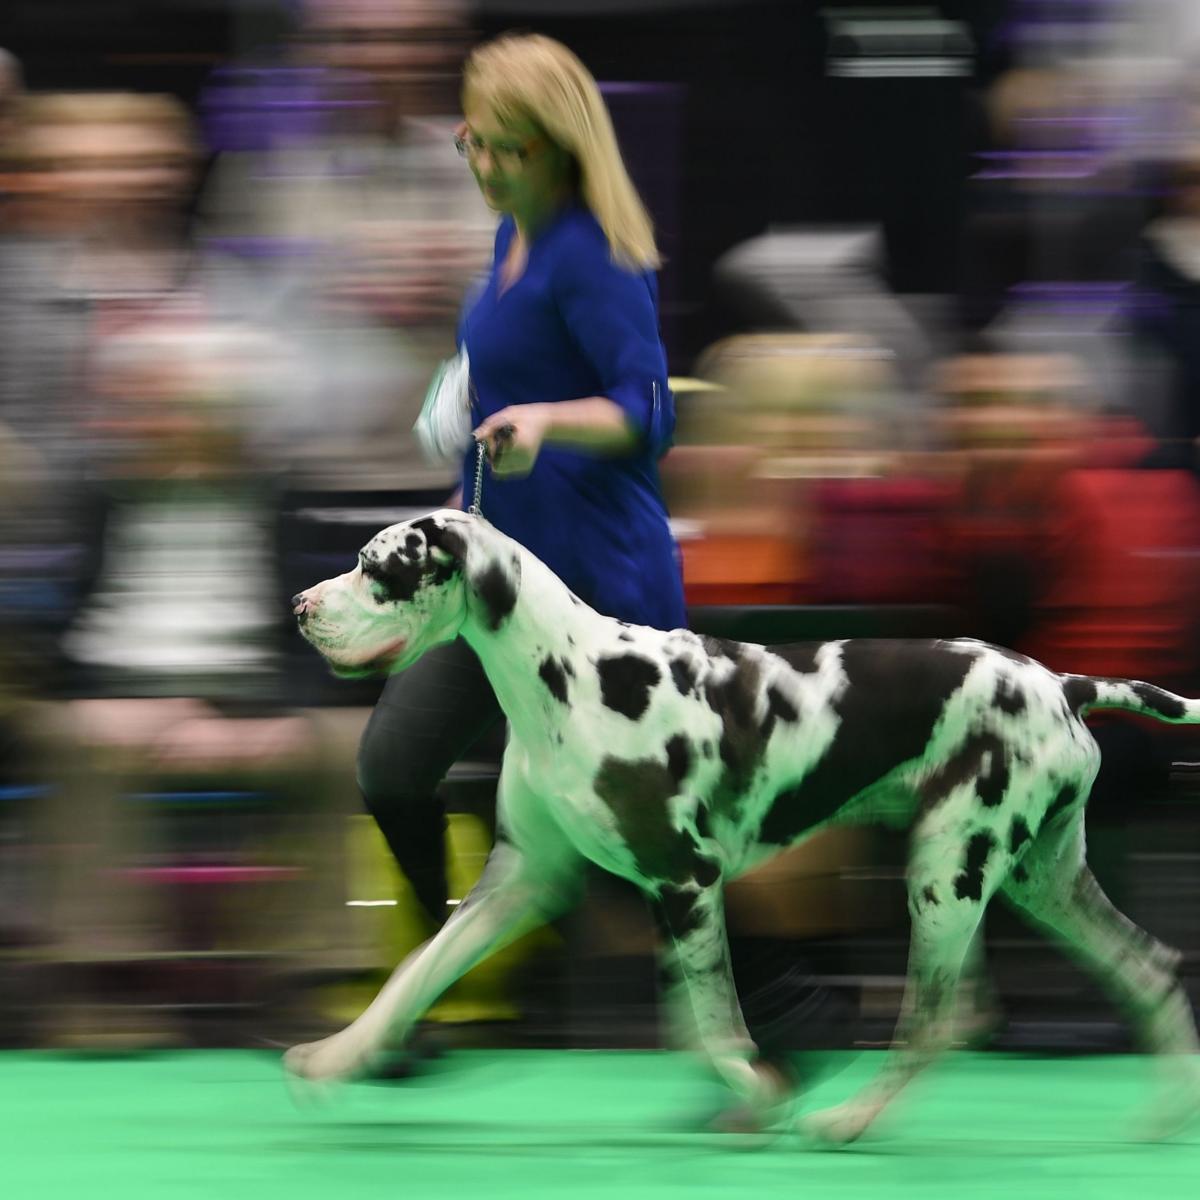 Crufts Dog Show Results 2018: Thursday Winners, Updated Schedule and TV Info ...